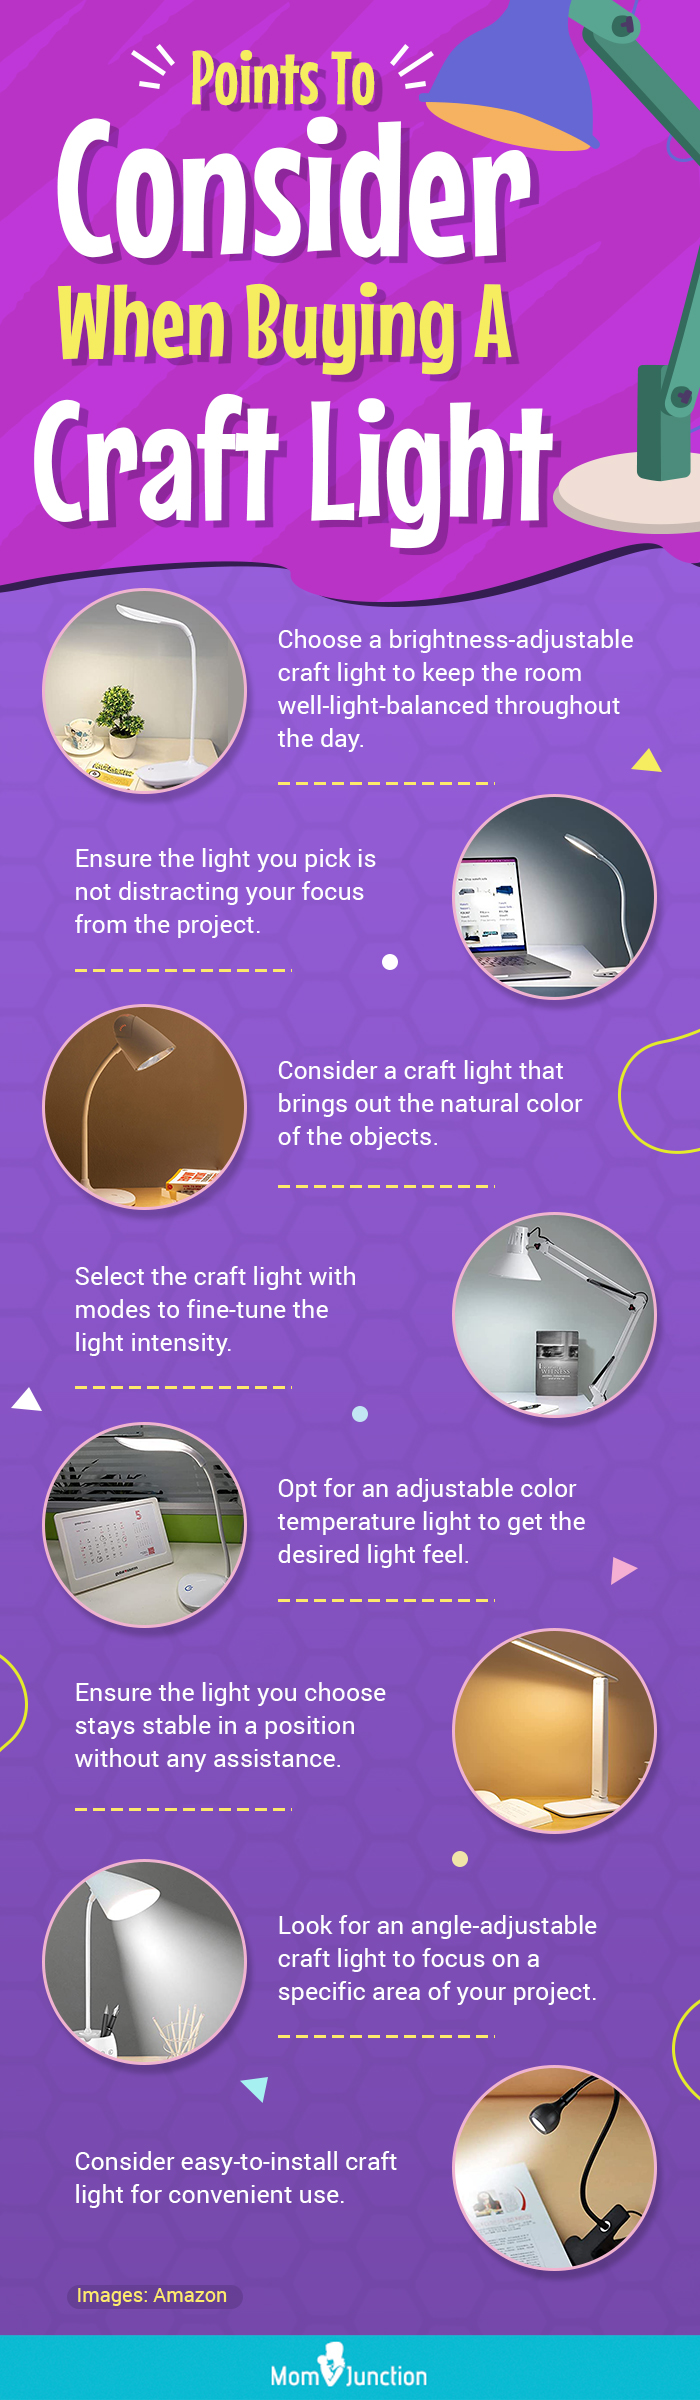 Points-To-Consider-When-Buying-A-Craft-Light (infographic)